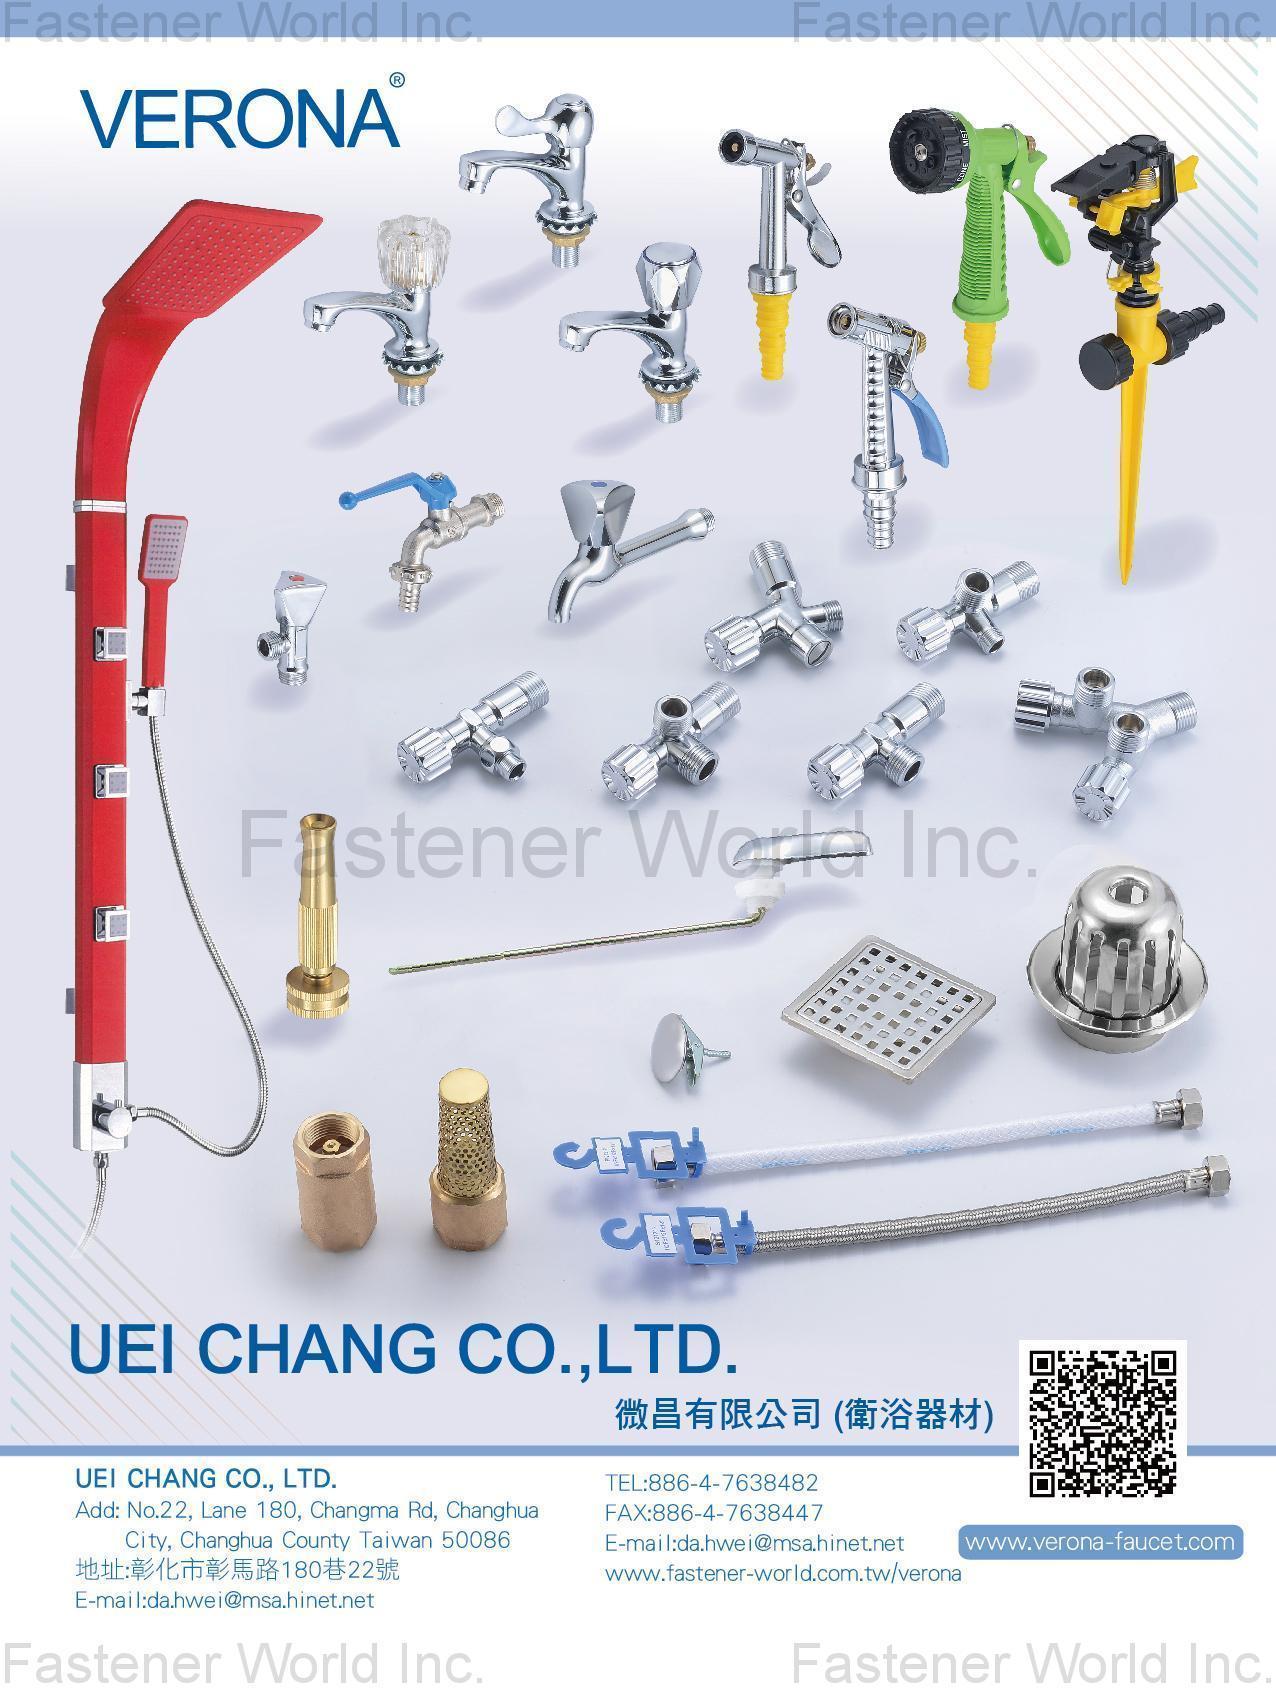 UEI CHANG CO., LTD. , Shower Panels, Mixer/Faucet, Shower, Stainless Steel Series, Angle Valves, Hose, Connection , Shower Equipment